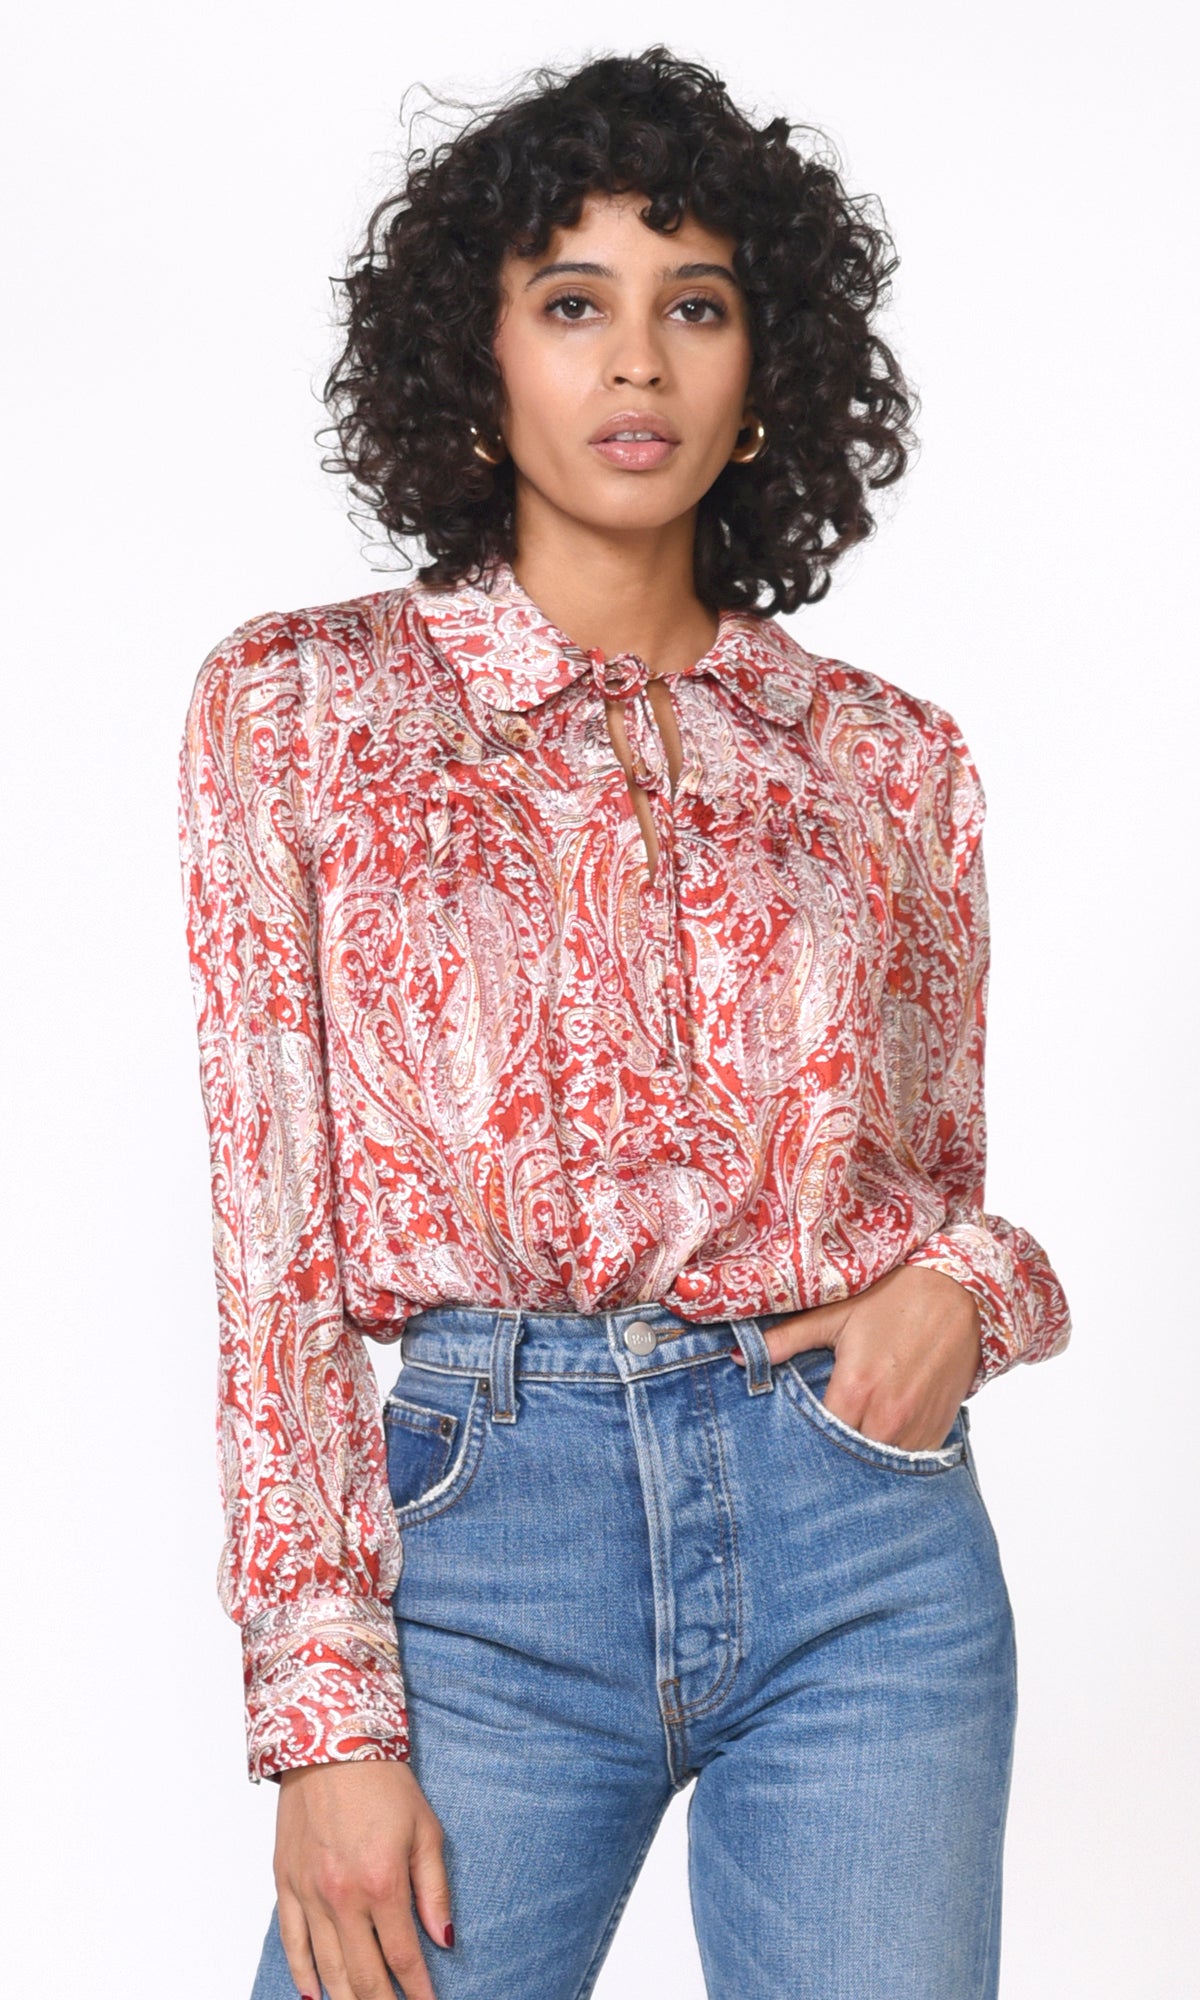 Allison Peter Pan Collared Blouse - FINAL SALE – Greylin Collection ...